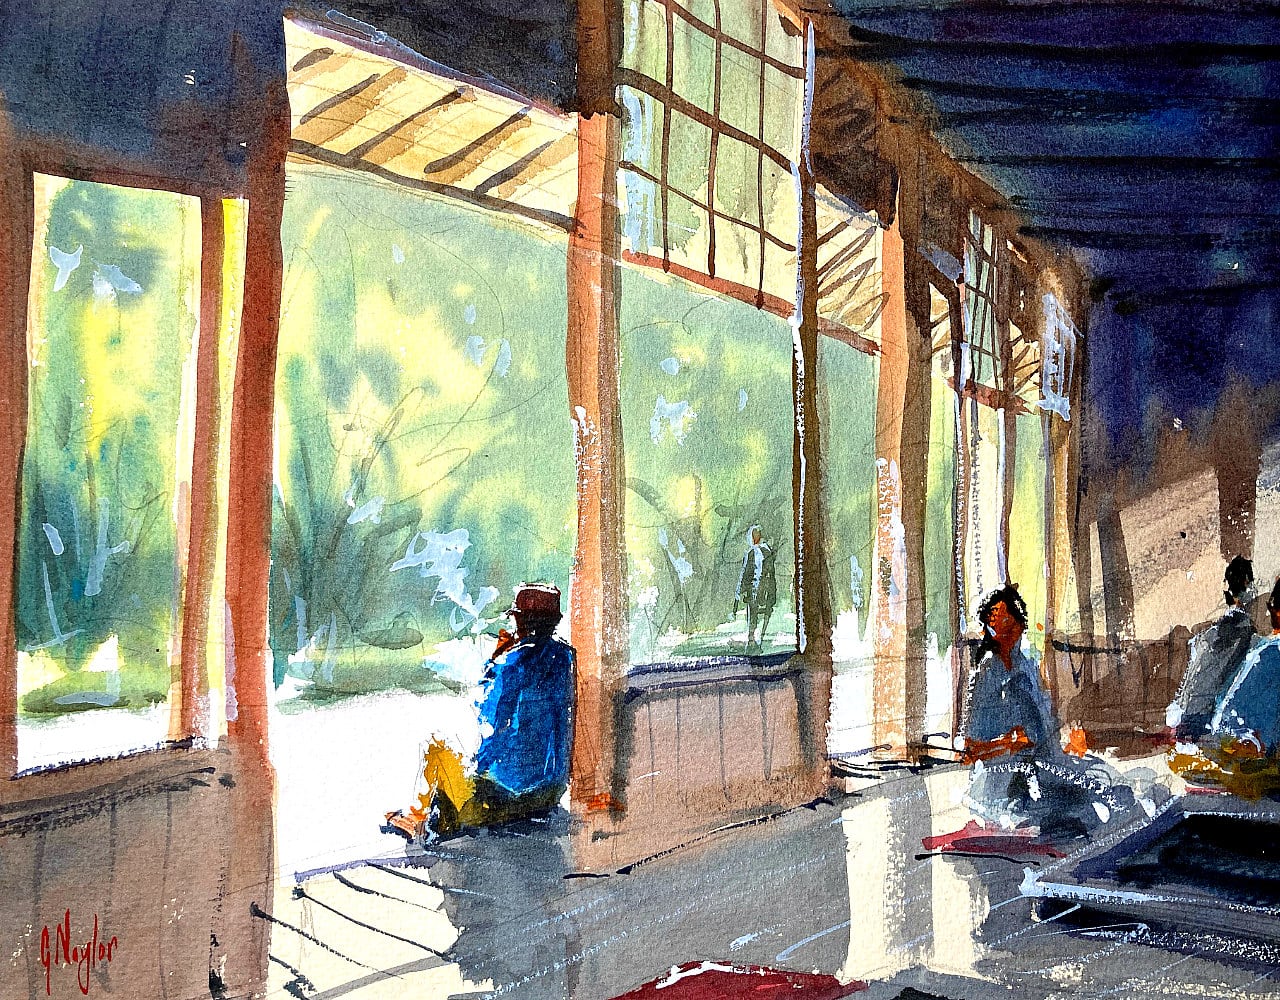 Watercolor painting of the interior of a traditional Japanese building